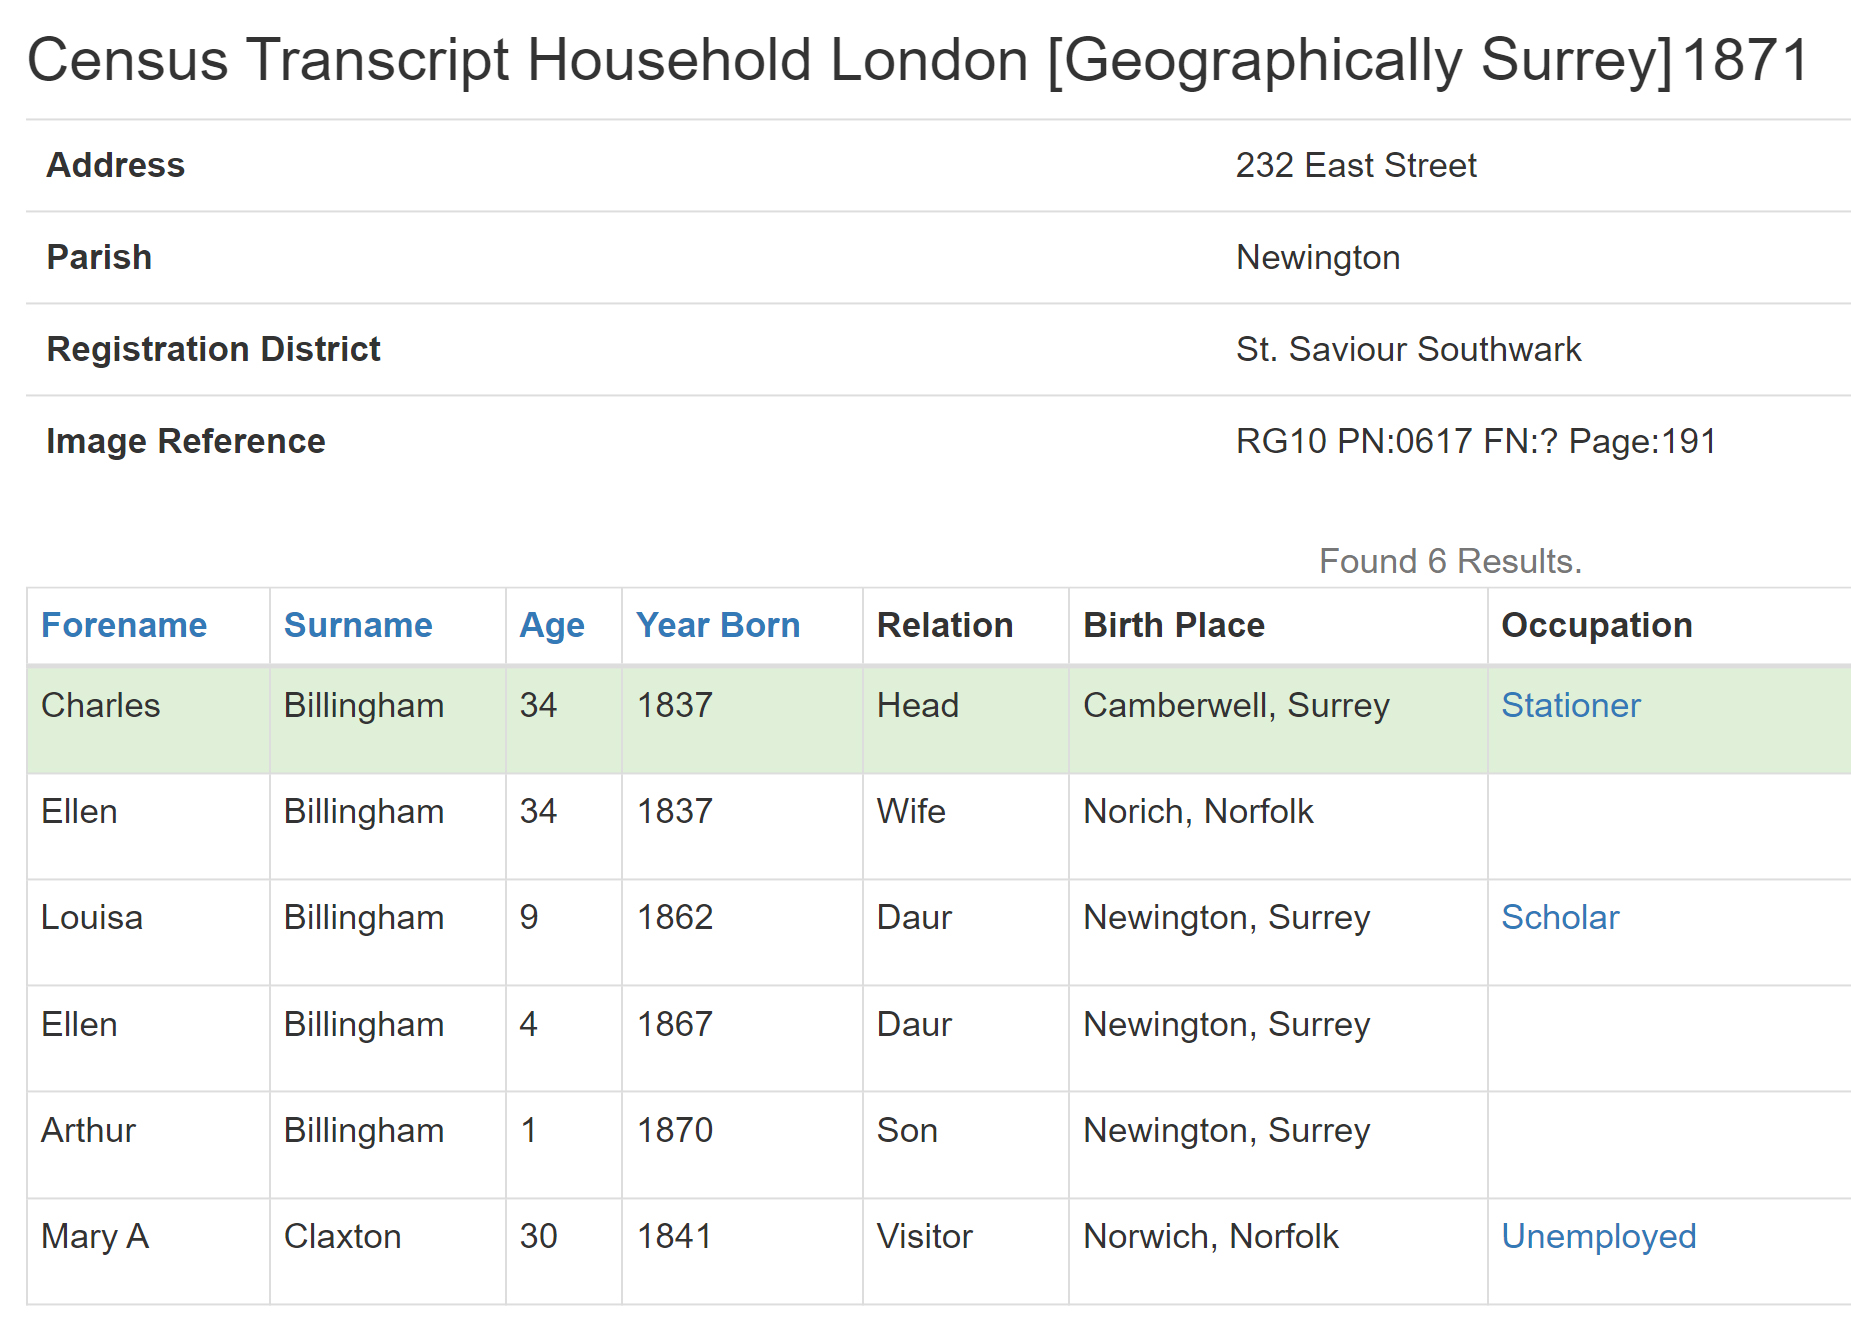 Charles and family in the 1871 Census